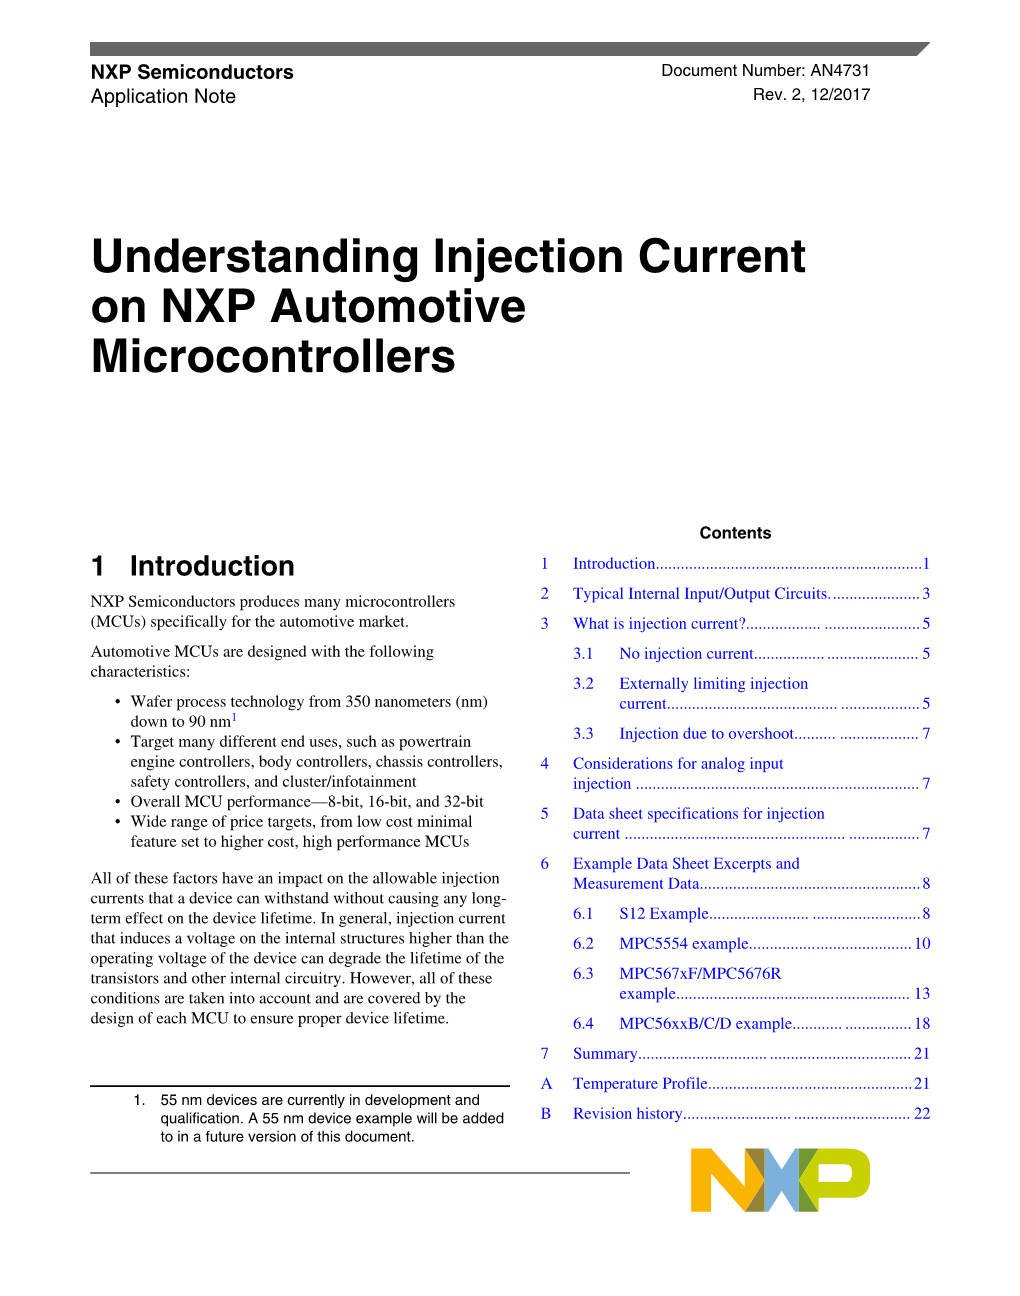 Understanding Injection Current on NXP Automotive Microcontrollers